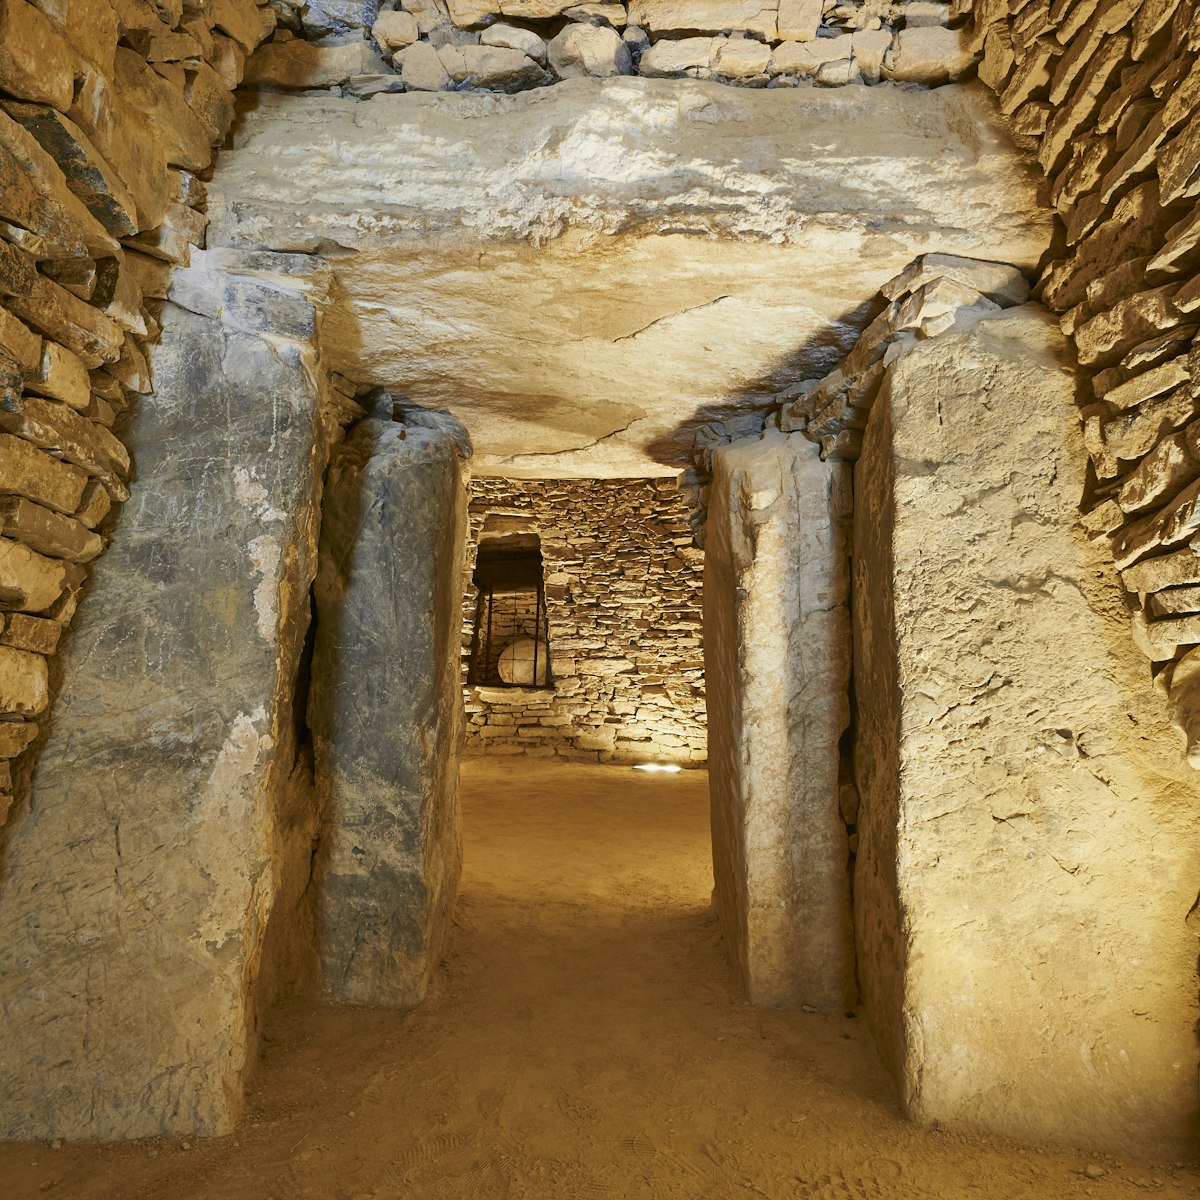 Interior of the Dolmen del Romeral megalithic monument in Antequera, Spain.